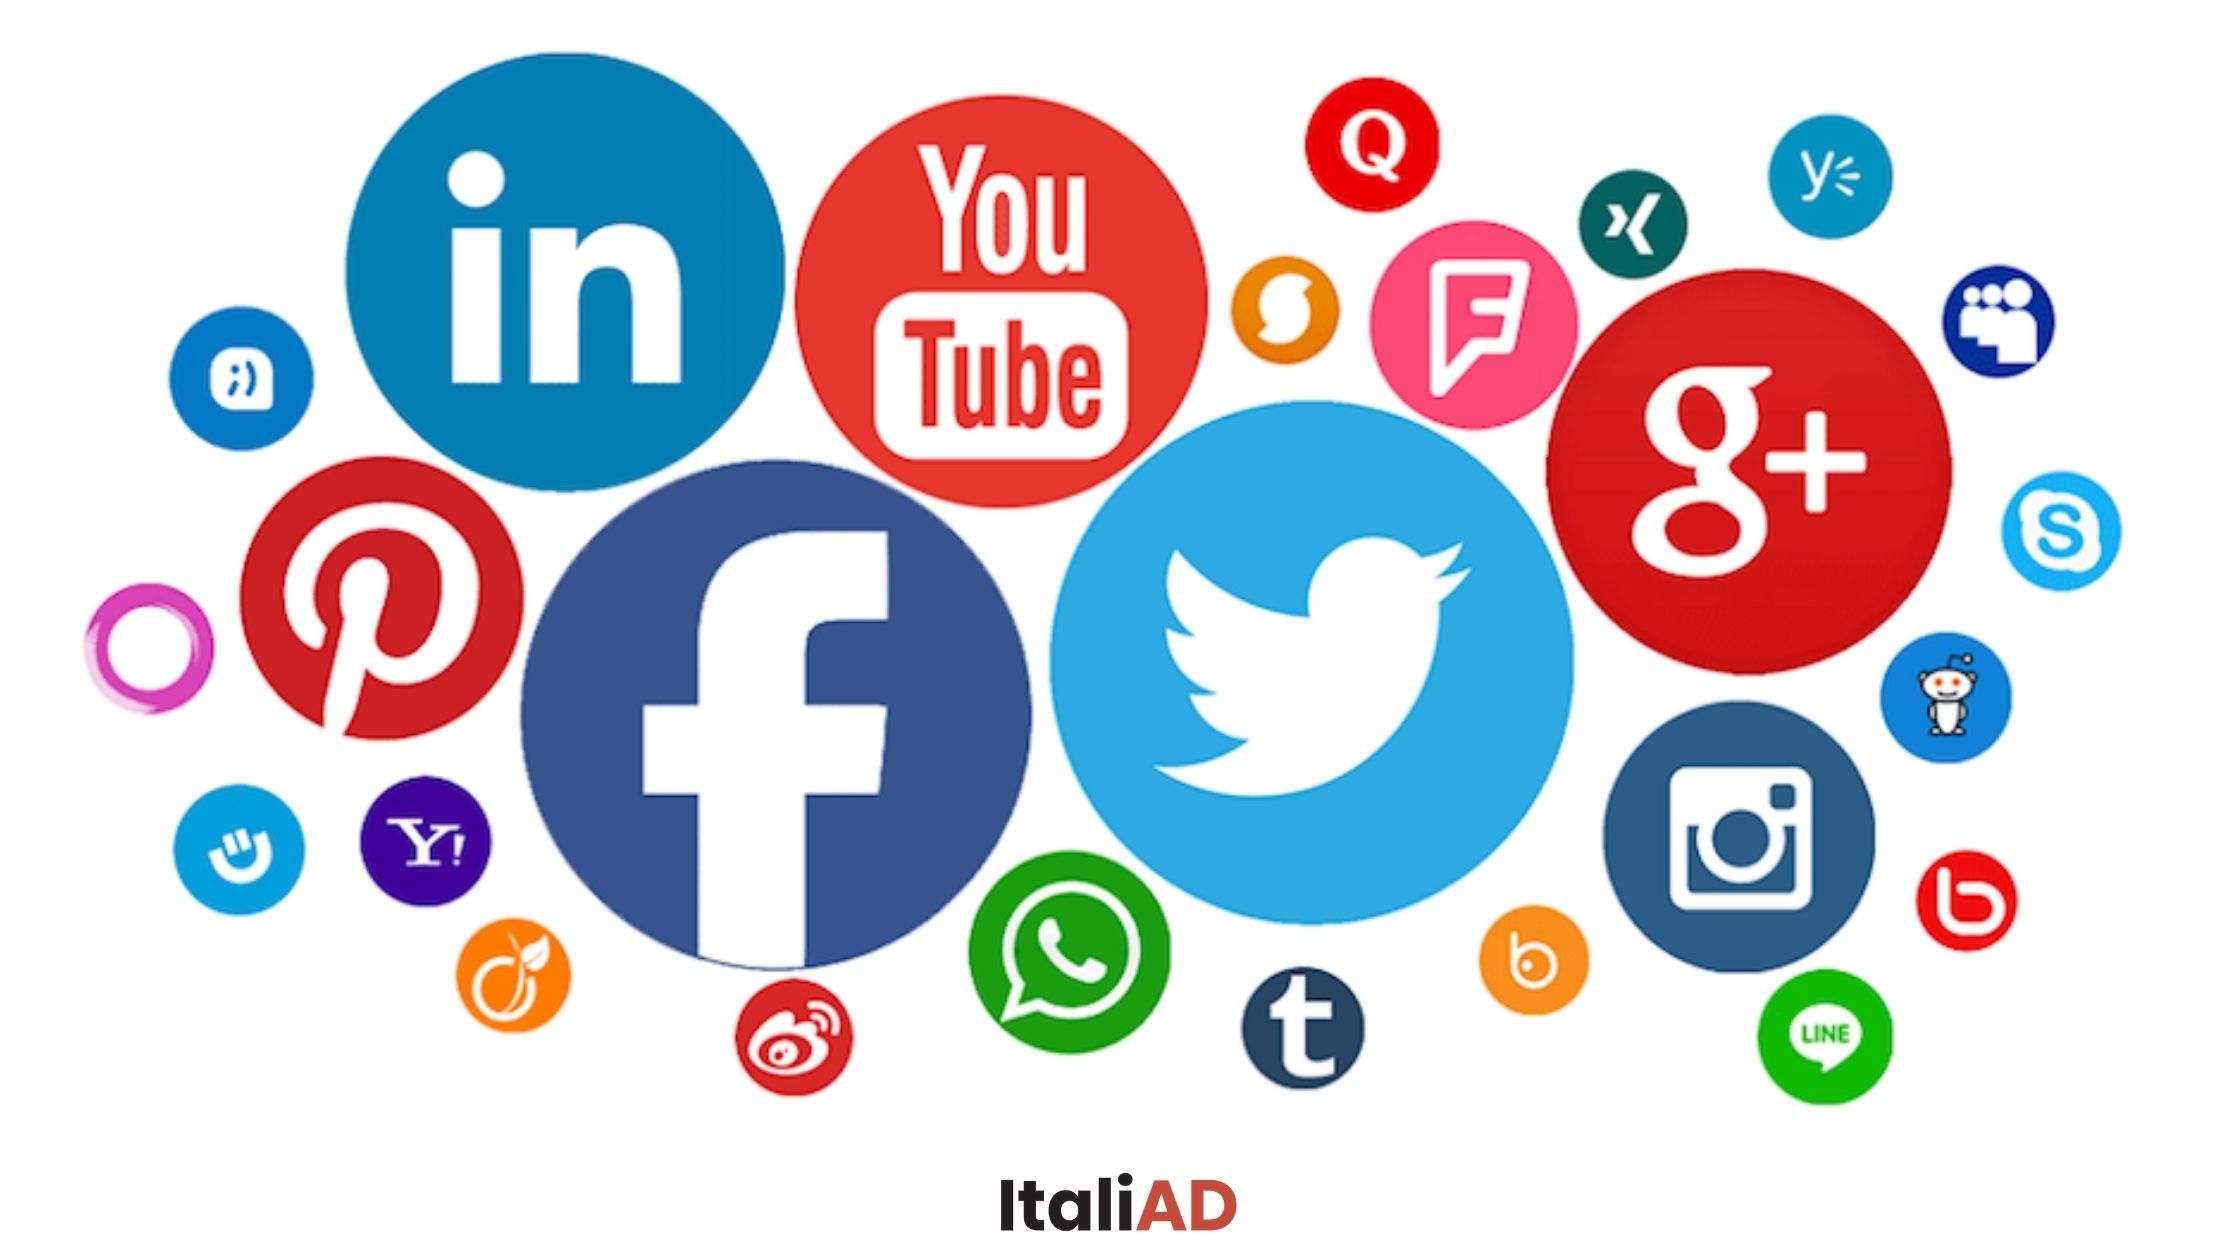 Le differenze tra i social network